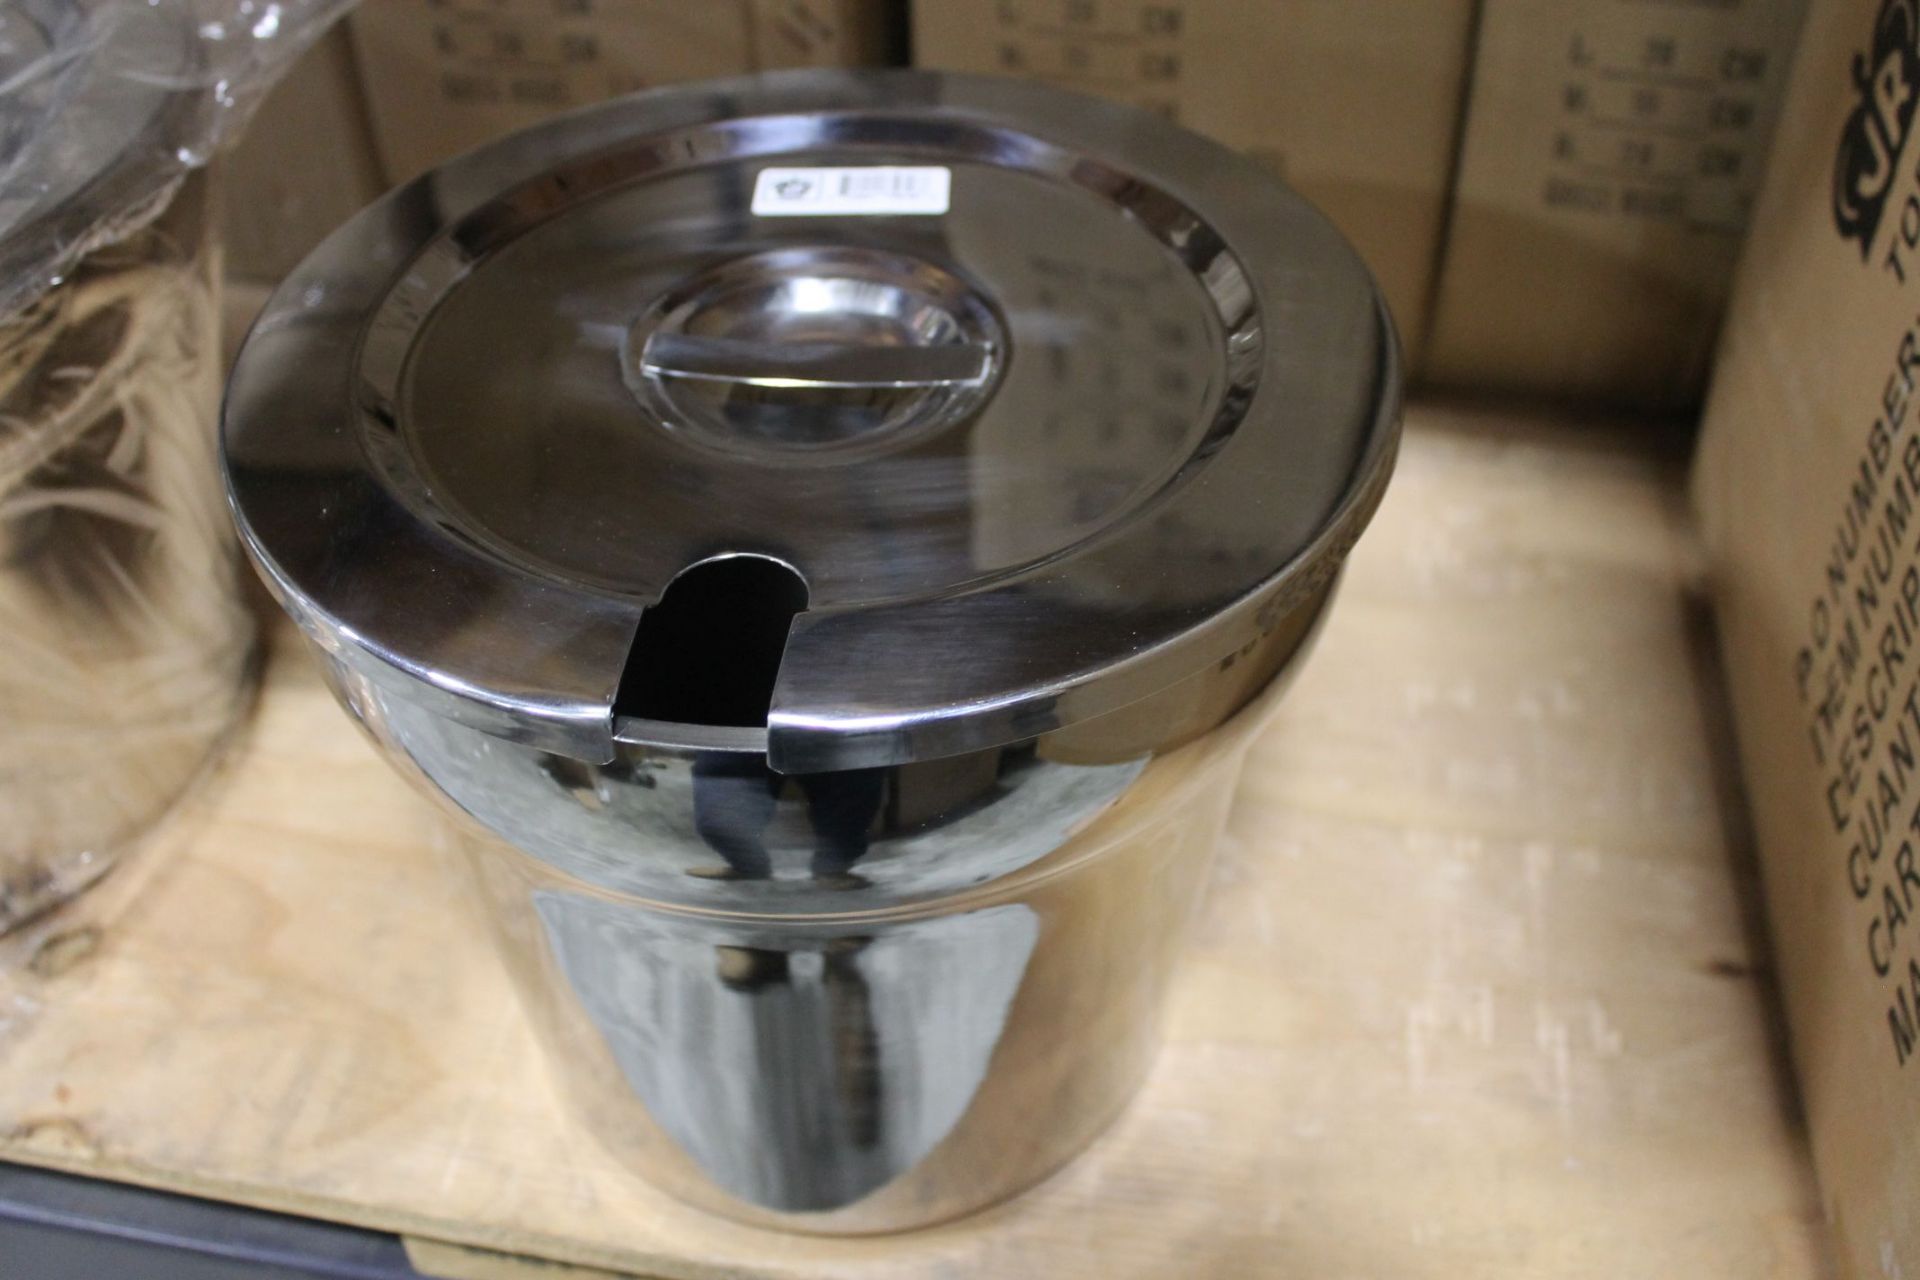 7.25qt Round Stainless Insert, 8.5" Opening, Johnson-Rose 75808 with Lid